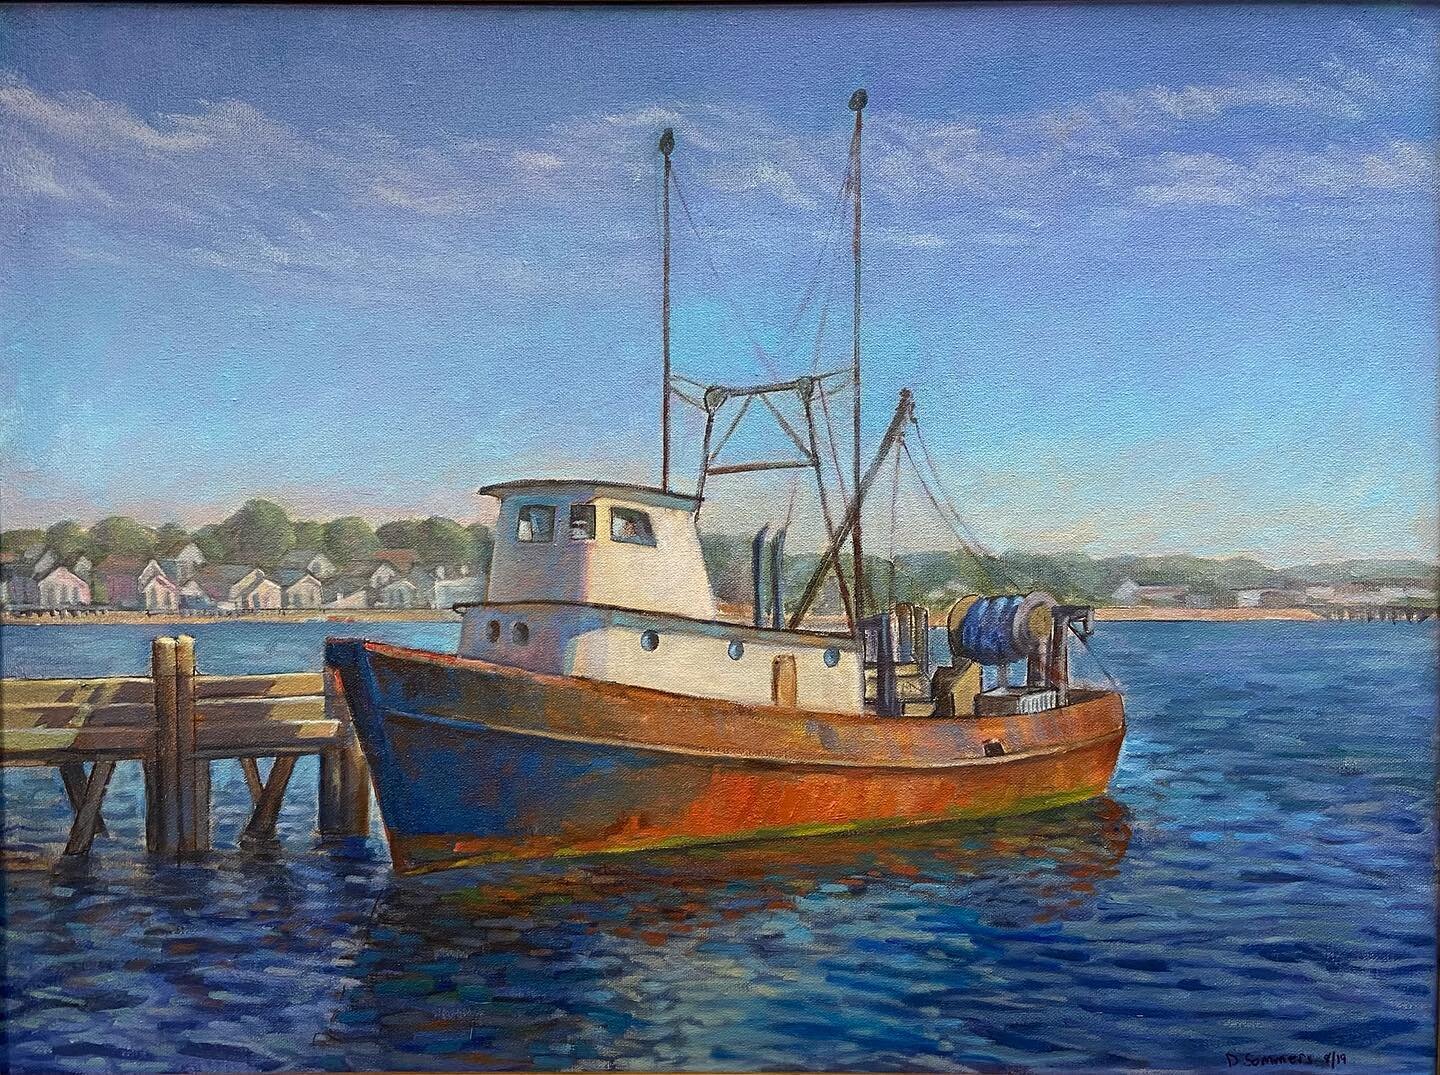 Joe &amp; I enjoy summer visits to Cape Cod &amp; the calming sea side vistas. This fishing trawler docked in Provincetown has always caught my eye. Painting water with its myriad reflections is a challenge. I also decided to edit out the other boats